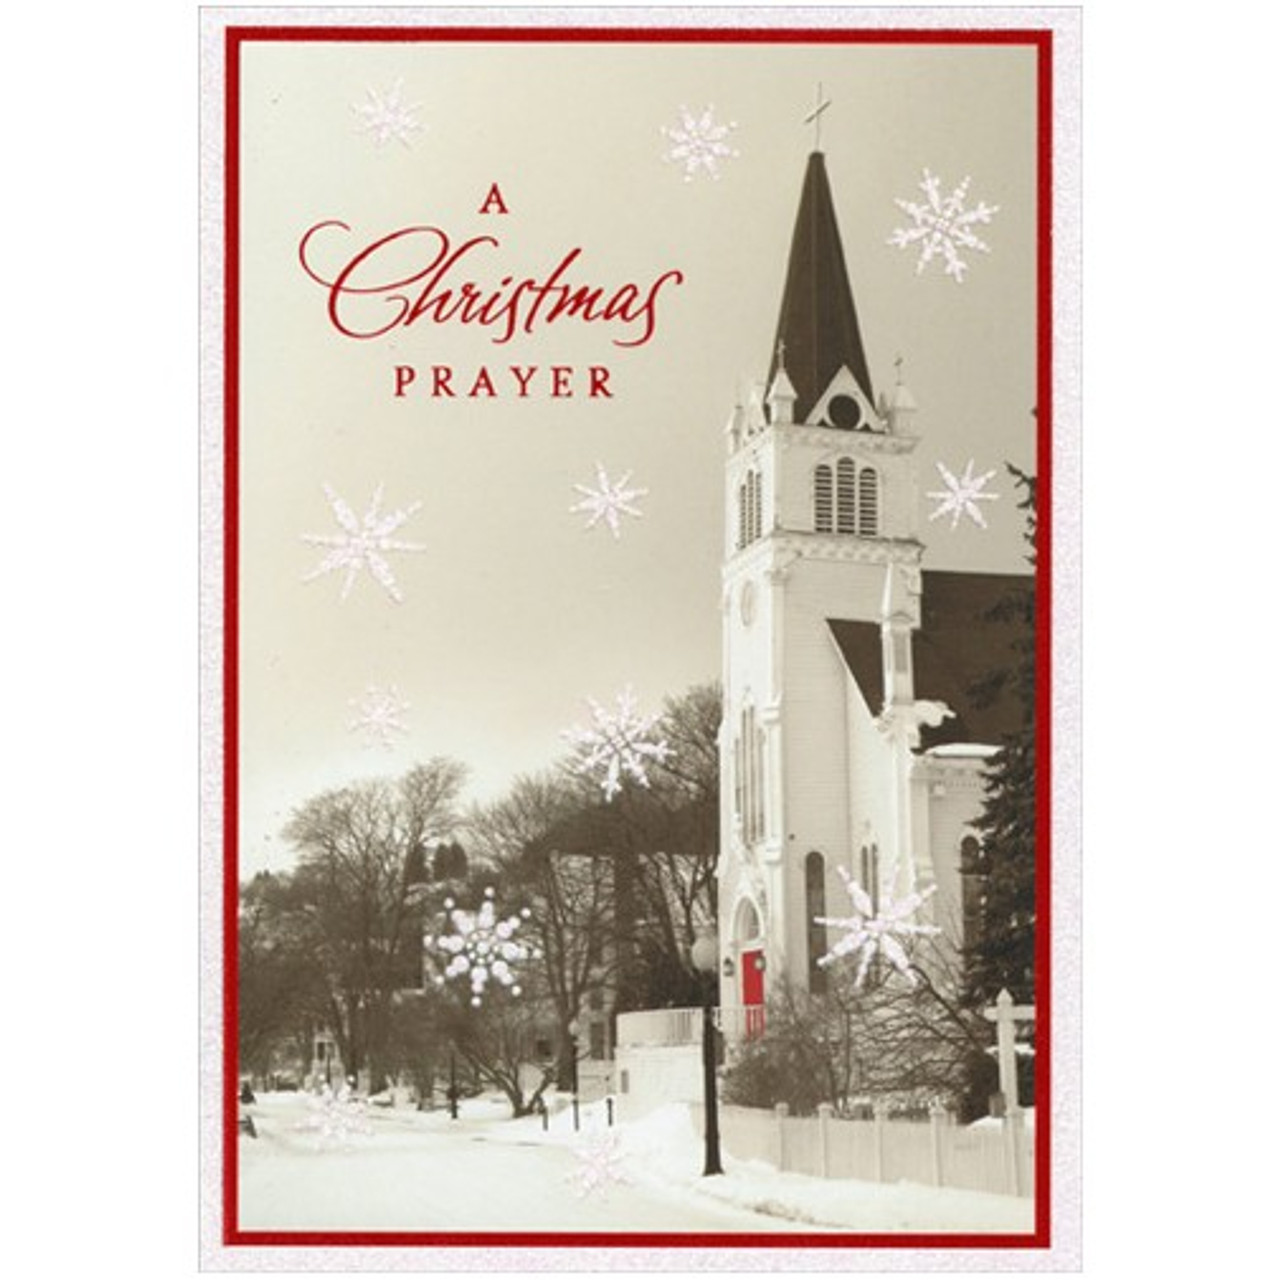  Christmas Steeple Christmas Card - Set of 15 : Greeting Cards  : Office Products